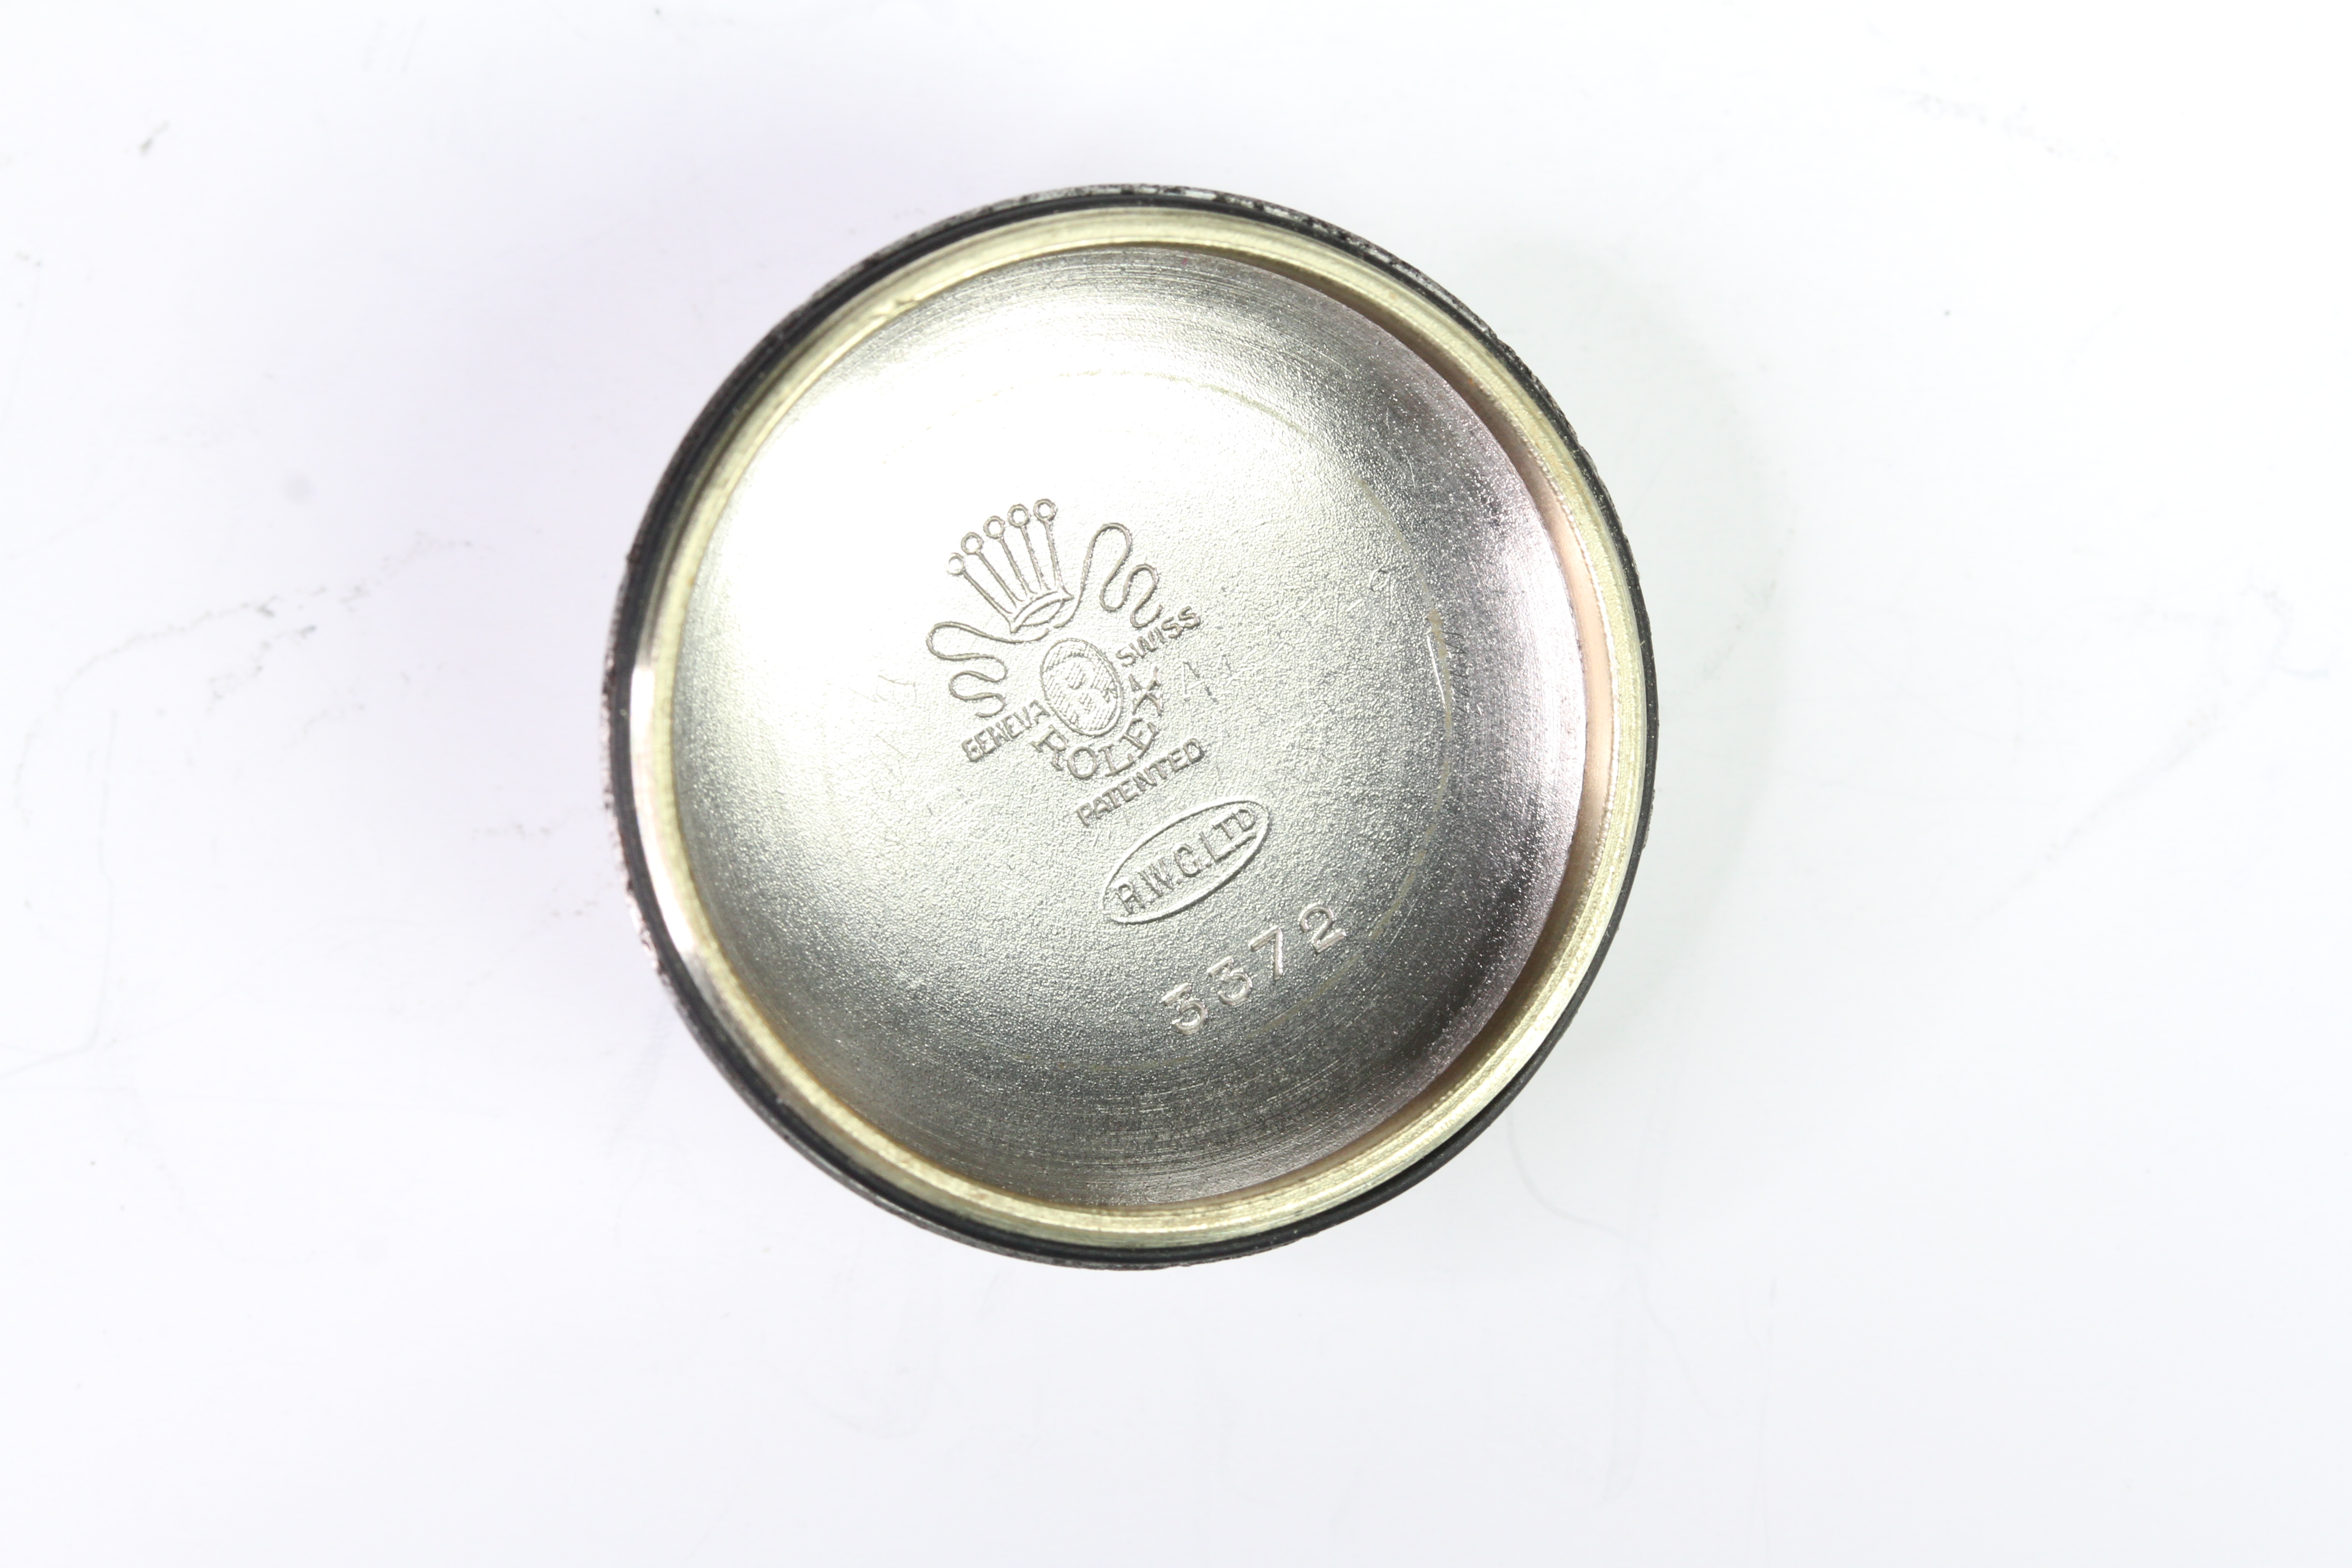 ROLEX OYSTER PERPETUAL 'BUBBLE BACK' REFERENCE 3372 CIRCA 1940s - Image 4 of 6